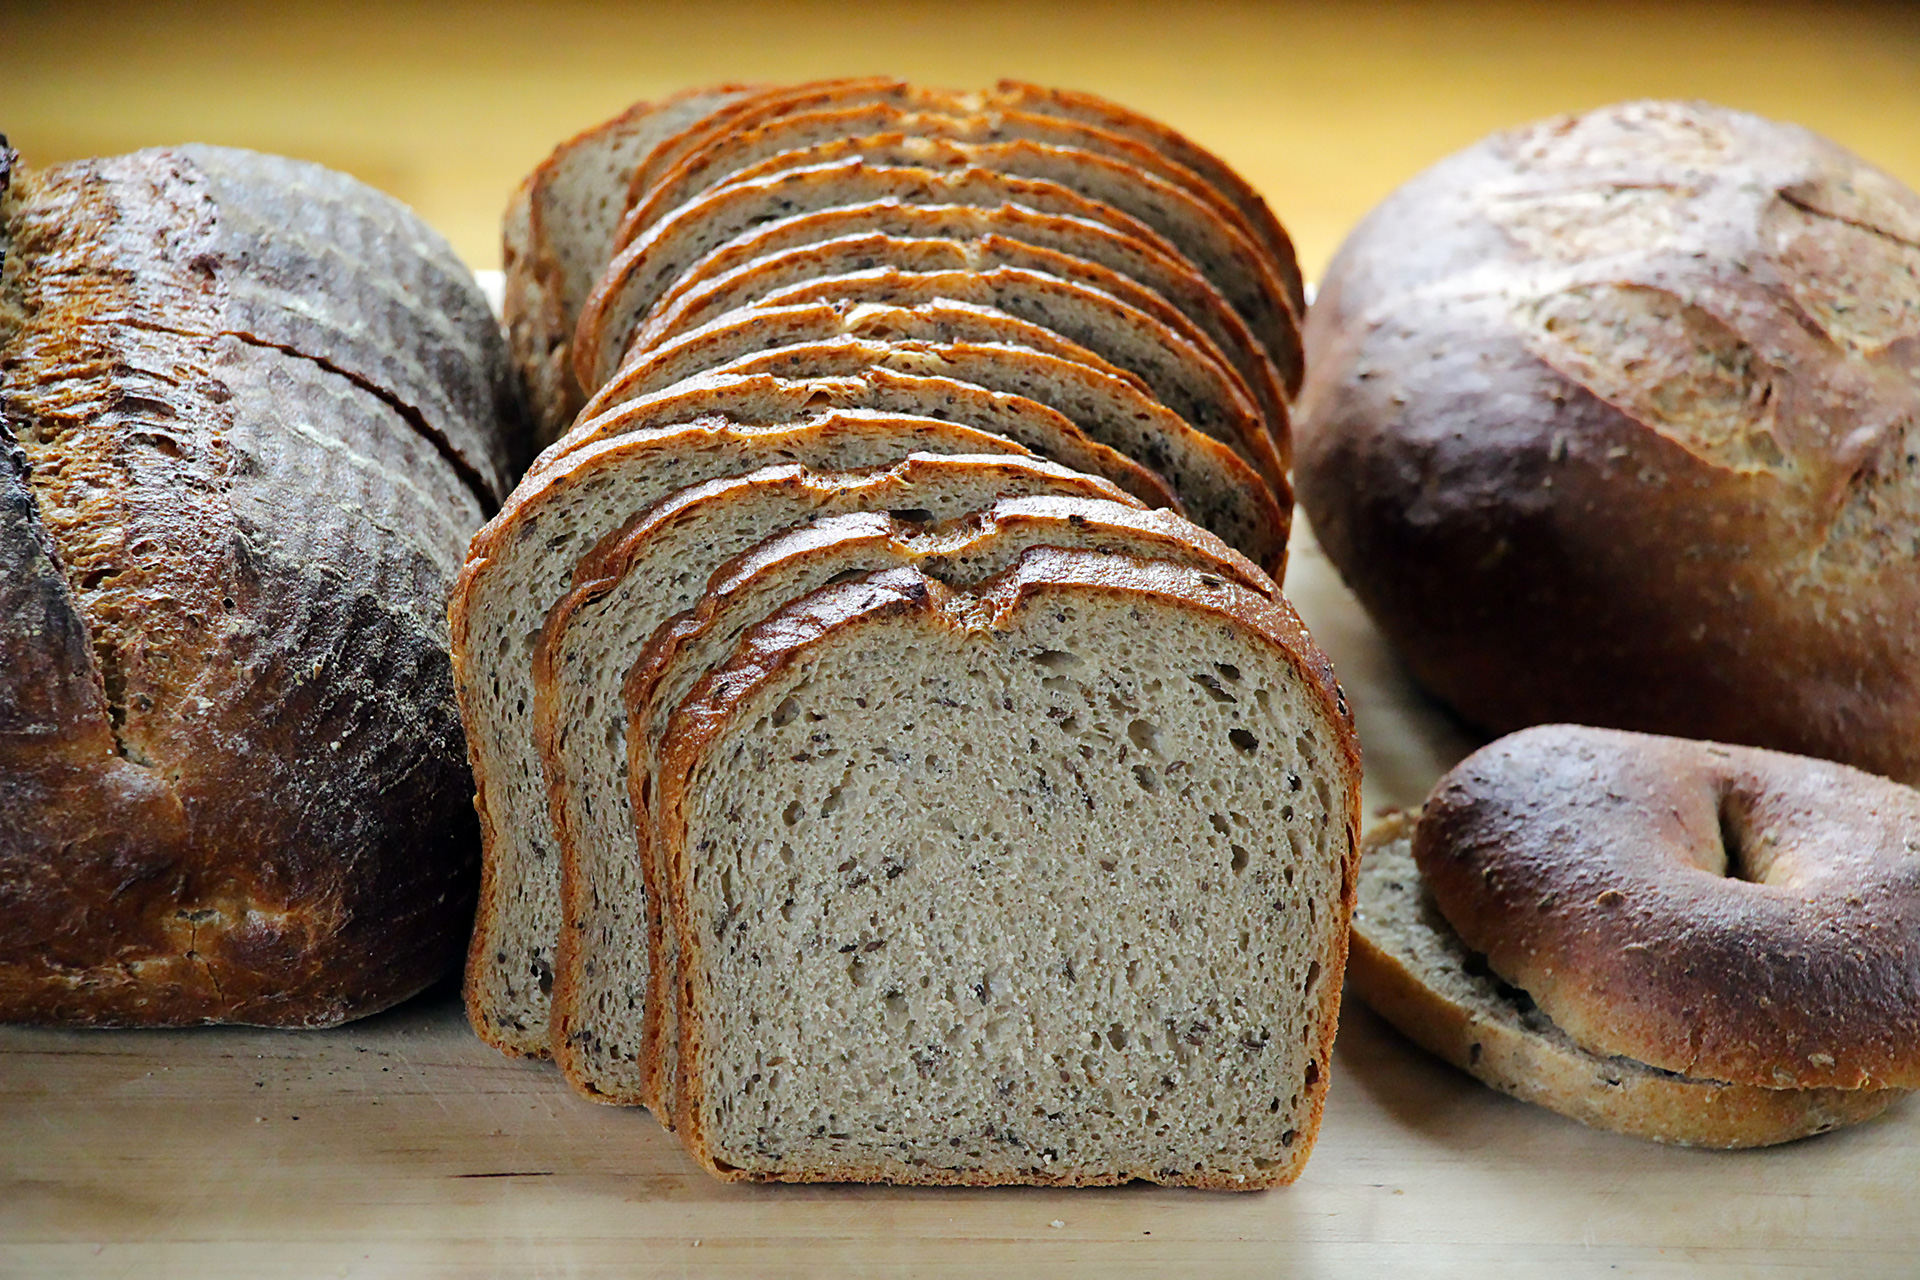 Rye Breads from East Bay bakeries